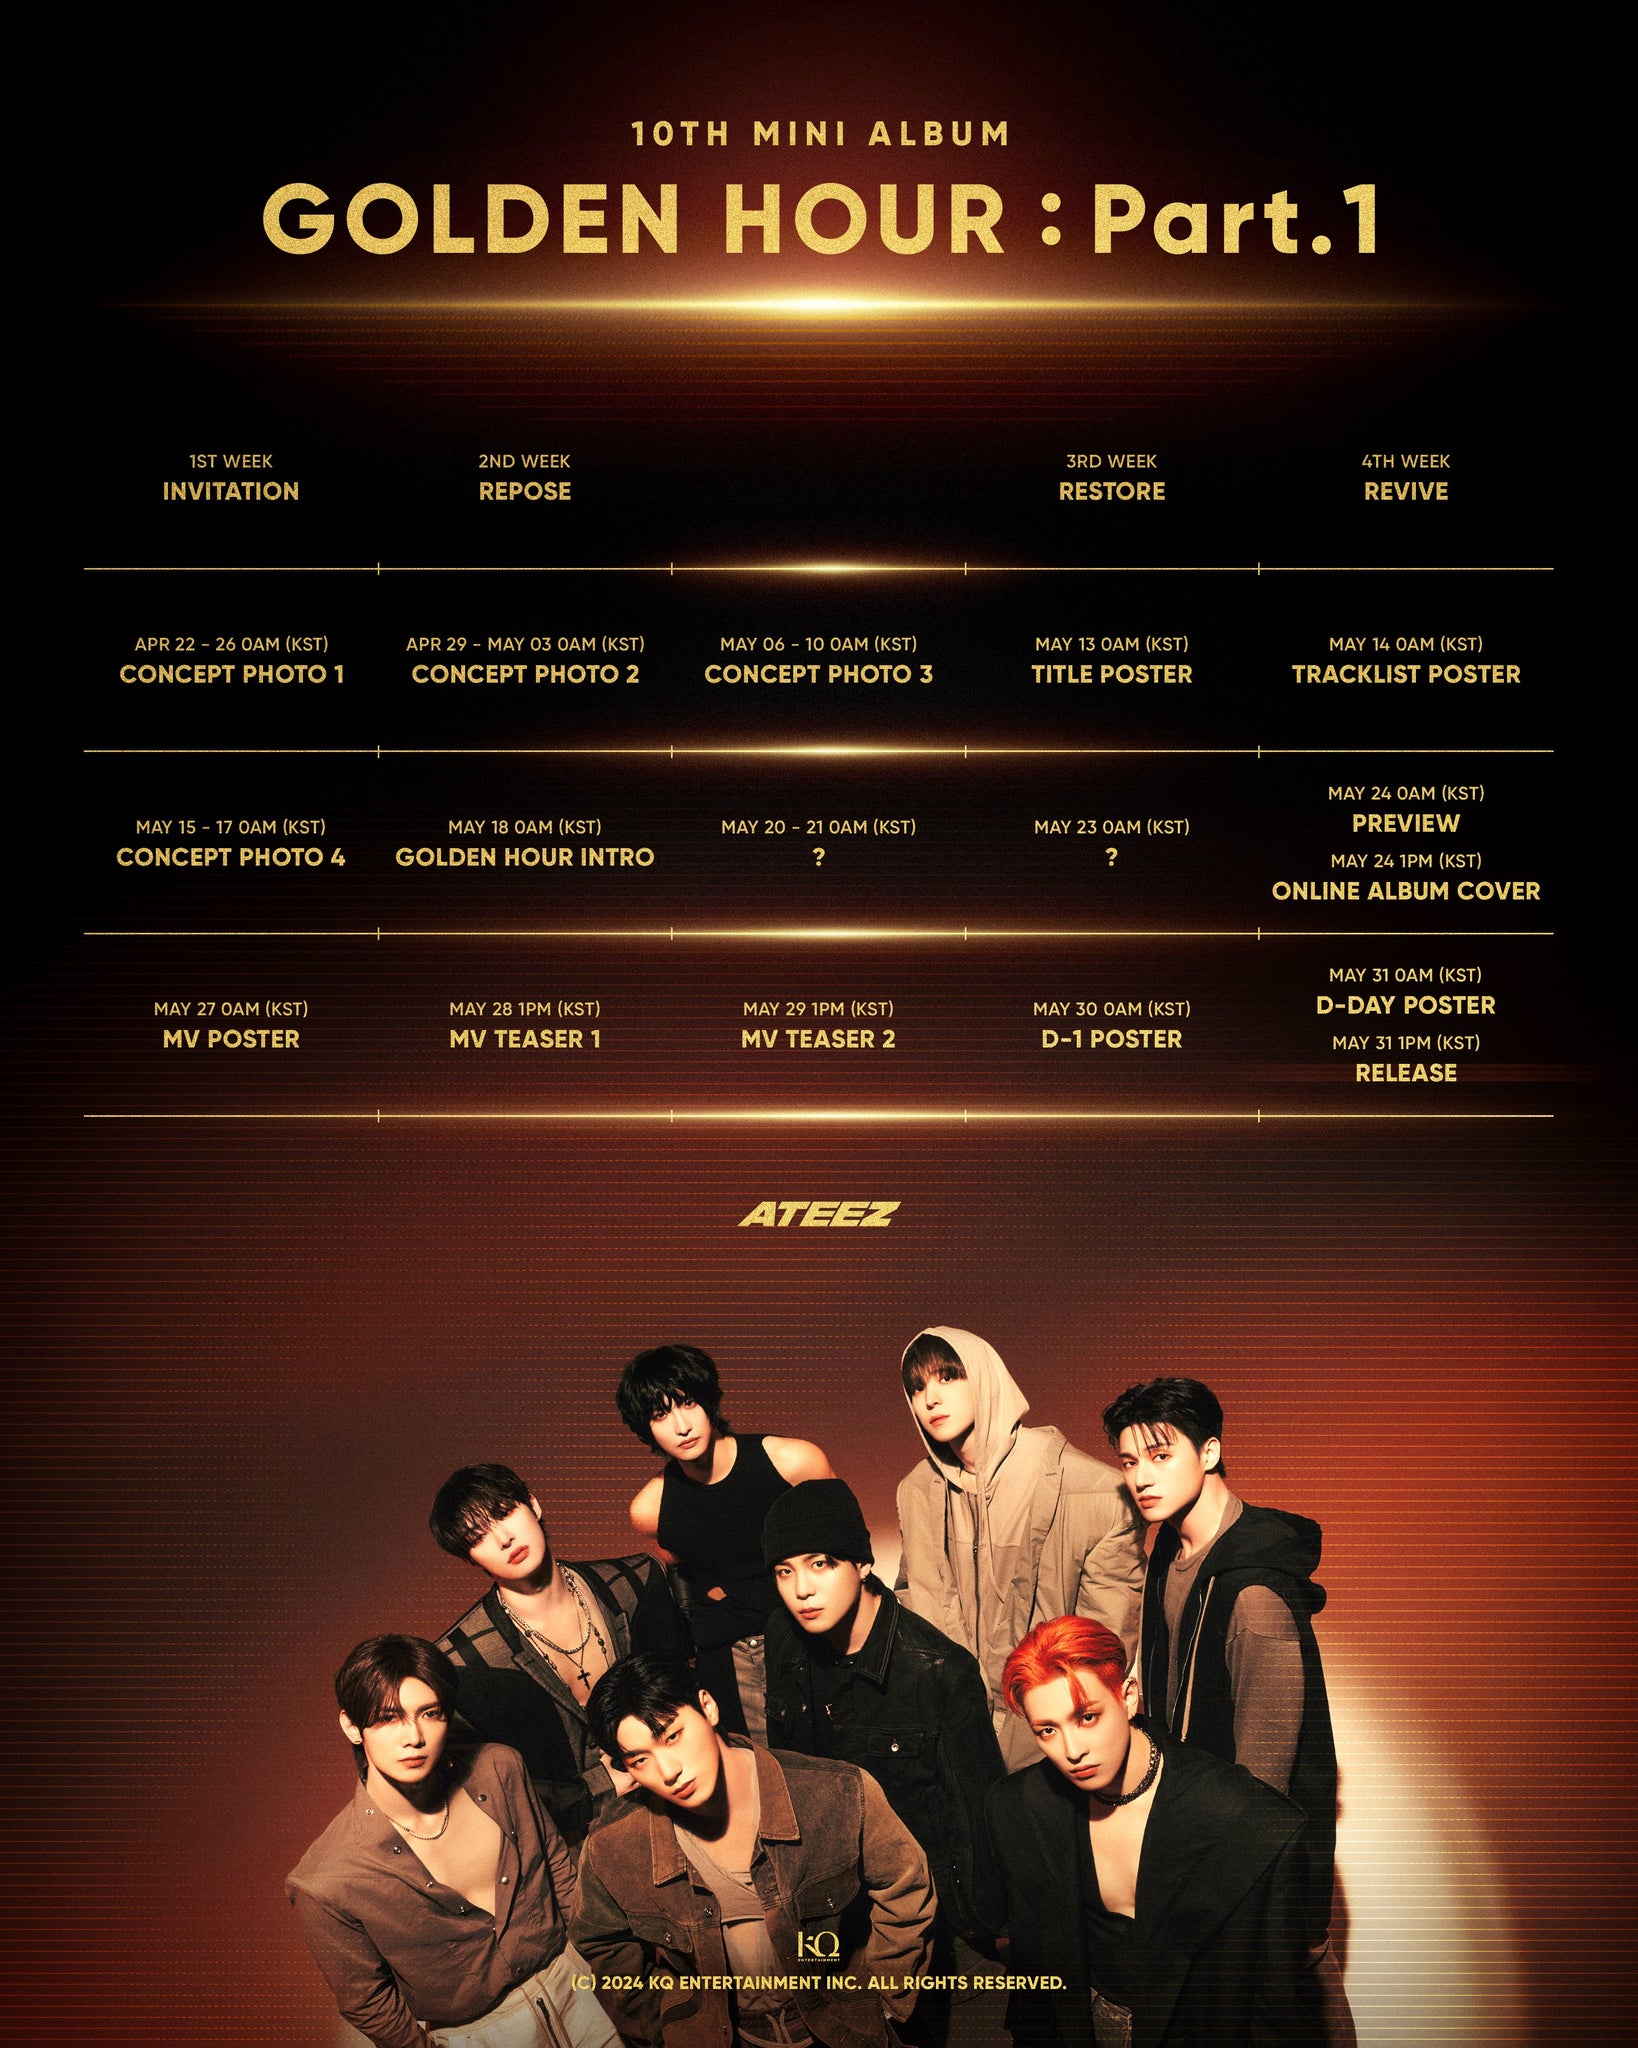 ATEEZ To Make Comeback With "GOLDEN HOUR: Part 1" In May